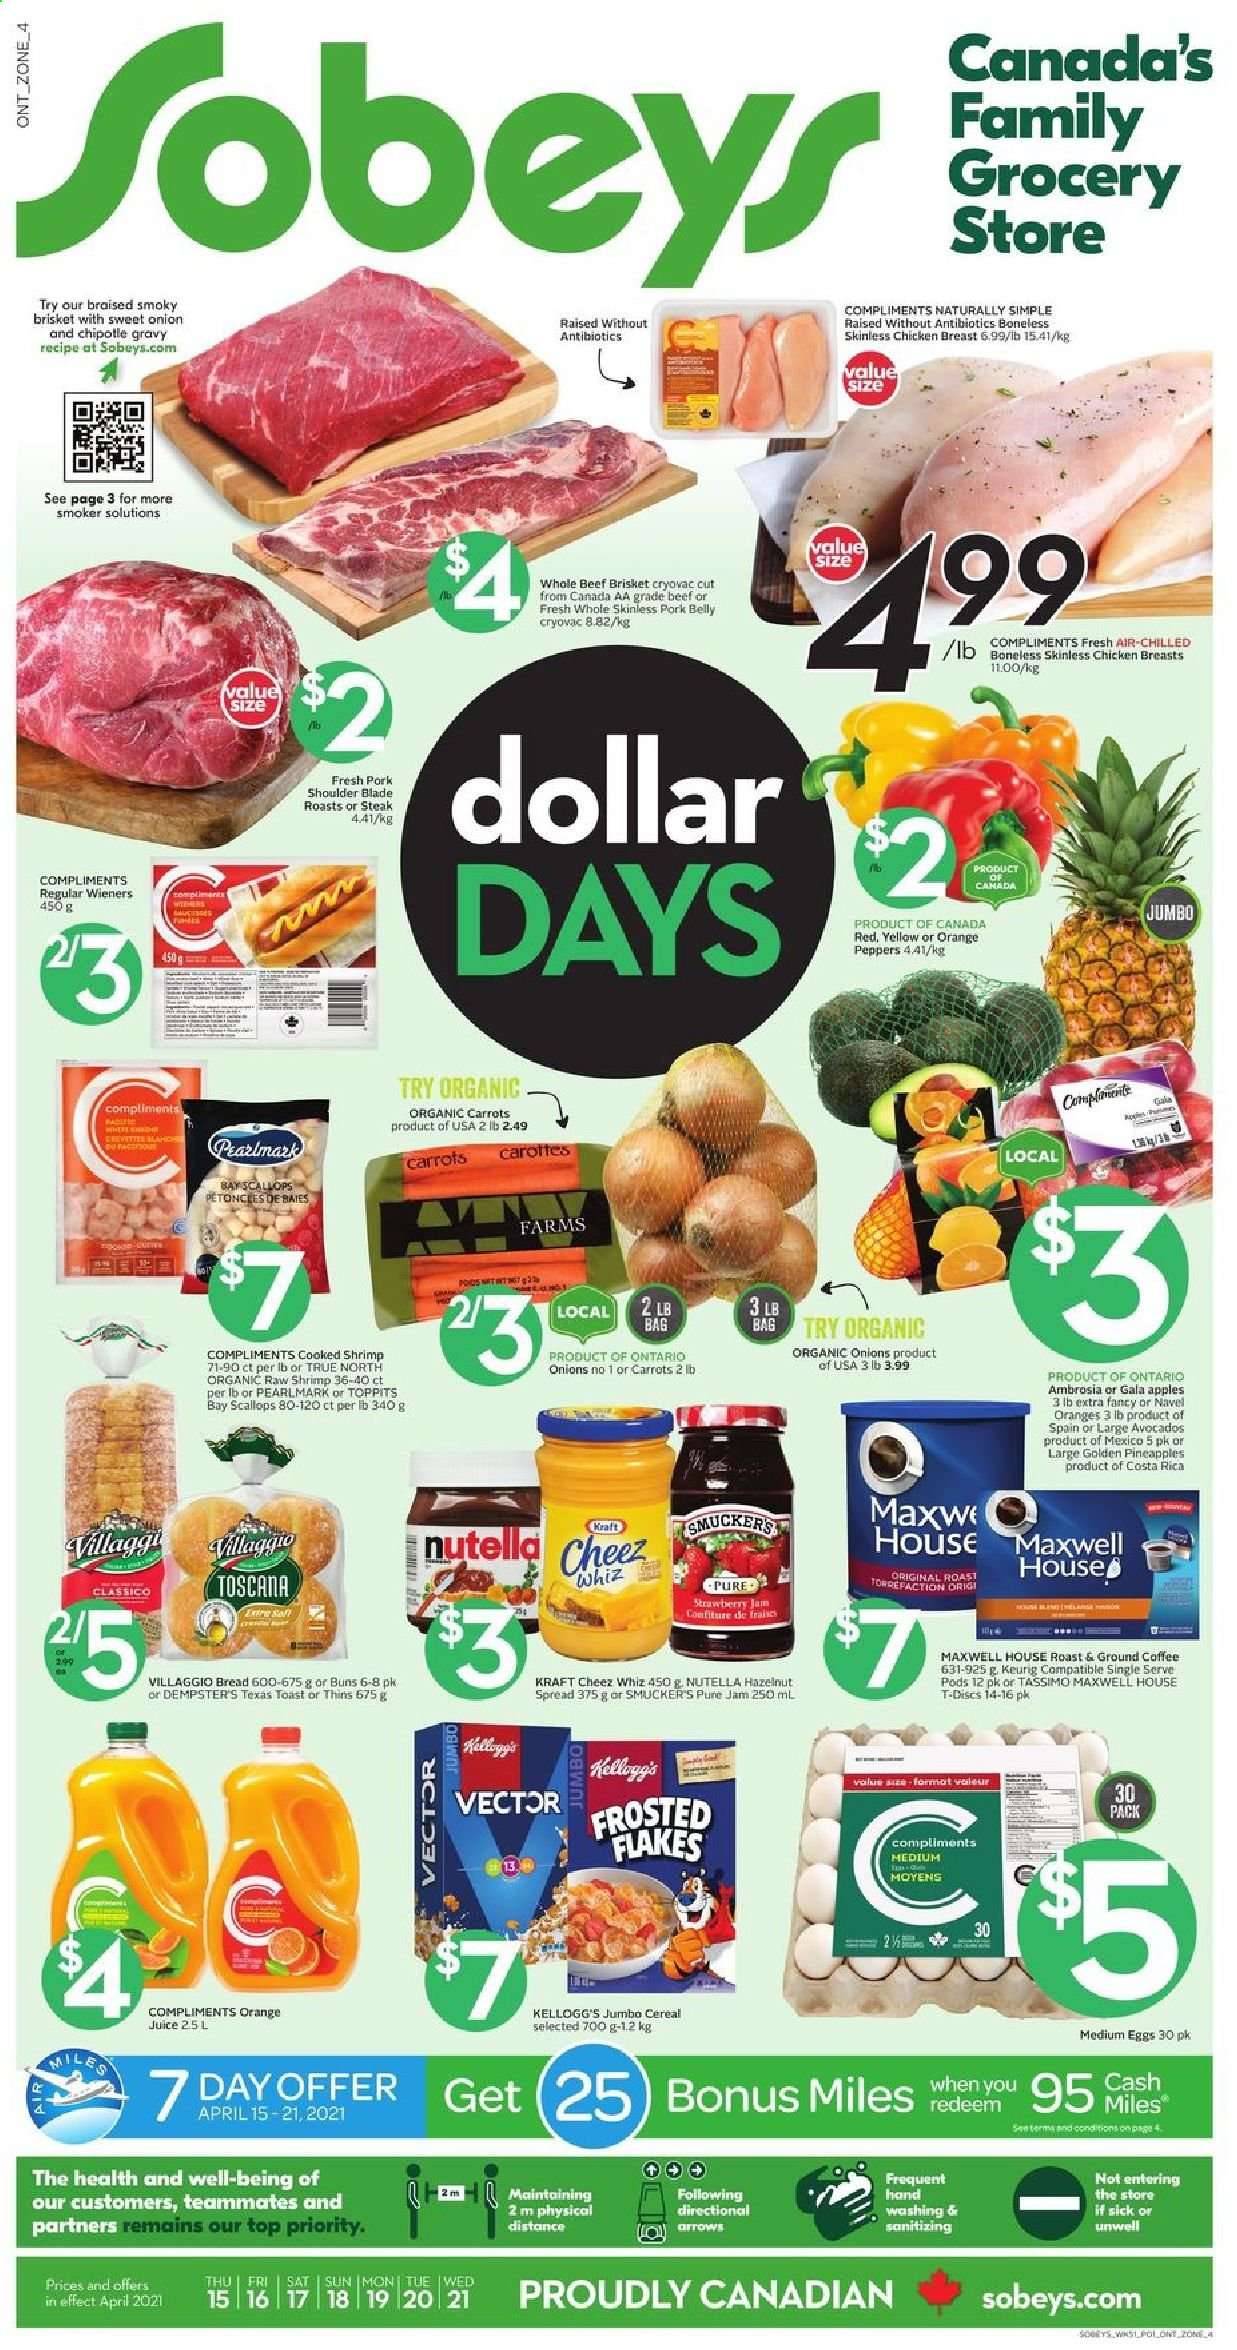 thumbnail - Sobeys Flyer - April 15, 2021 - April 21, 2021 - Sales products - bread, buns, onion, apples, avocado, Gala, pineapple, navel oranges, scallops, shrimps, Kraft®, eggs, Kellogg's, Thins, strawberry jam, cereals, Frosted Flakes, Classico, fruit jam, hazelnut spread, orange juice, juice, Maxwell House, coffee, ground coffee, Keurig, chicken breasts, chicken, beef meat, beef brisket, pork belly, pork meat, pork shoulder, Nutella, steak. Page 1.